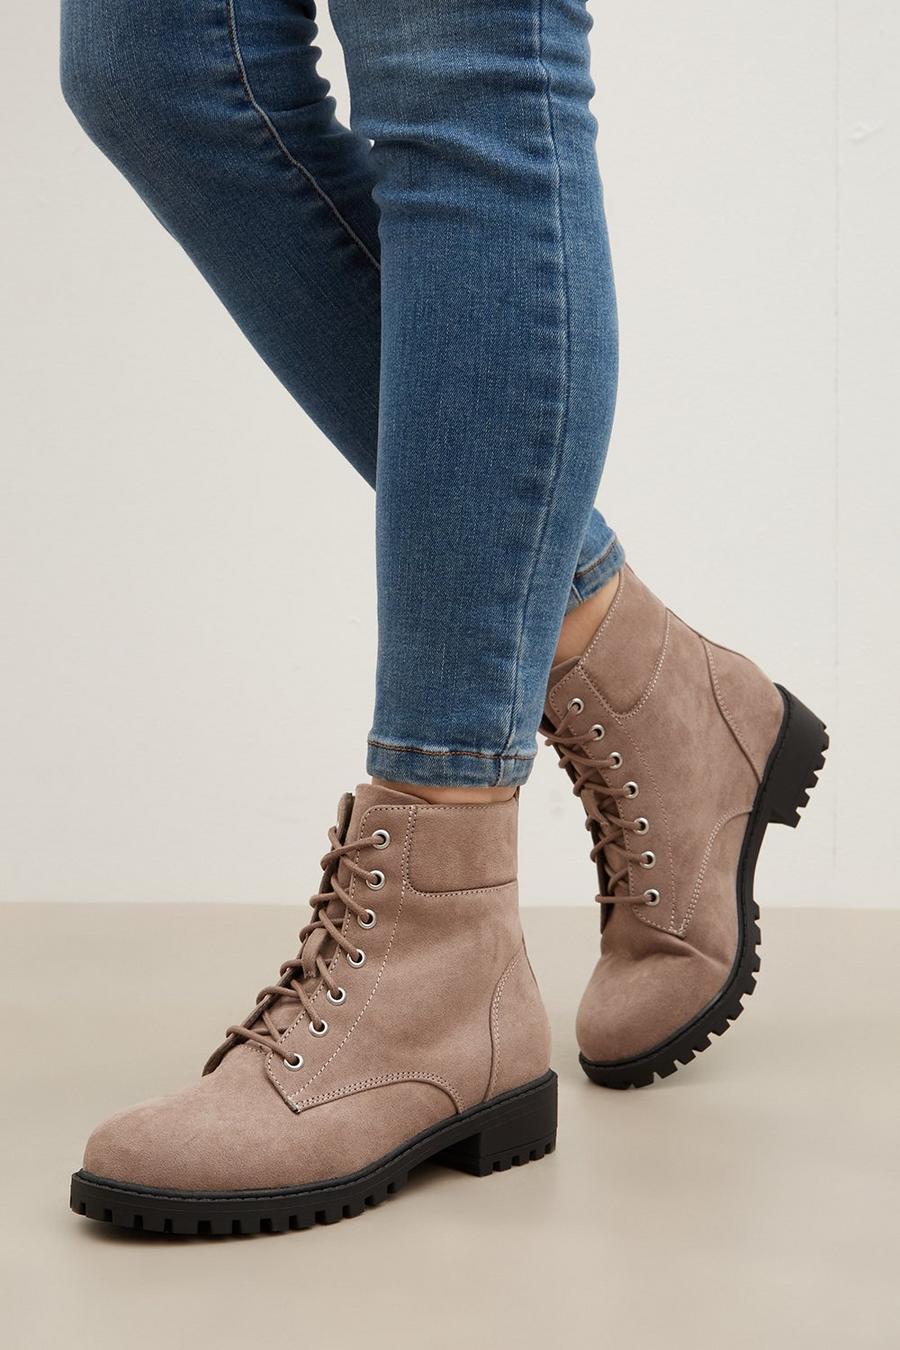 Good For The Sole: May Comfort Lace Up Boots